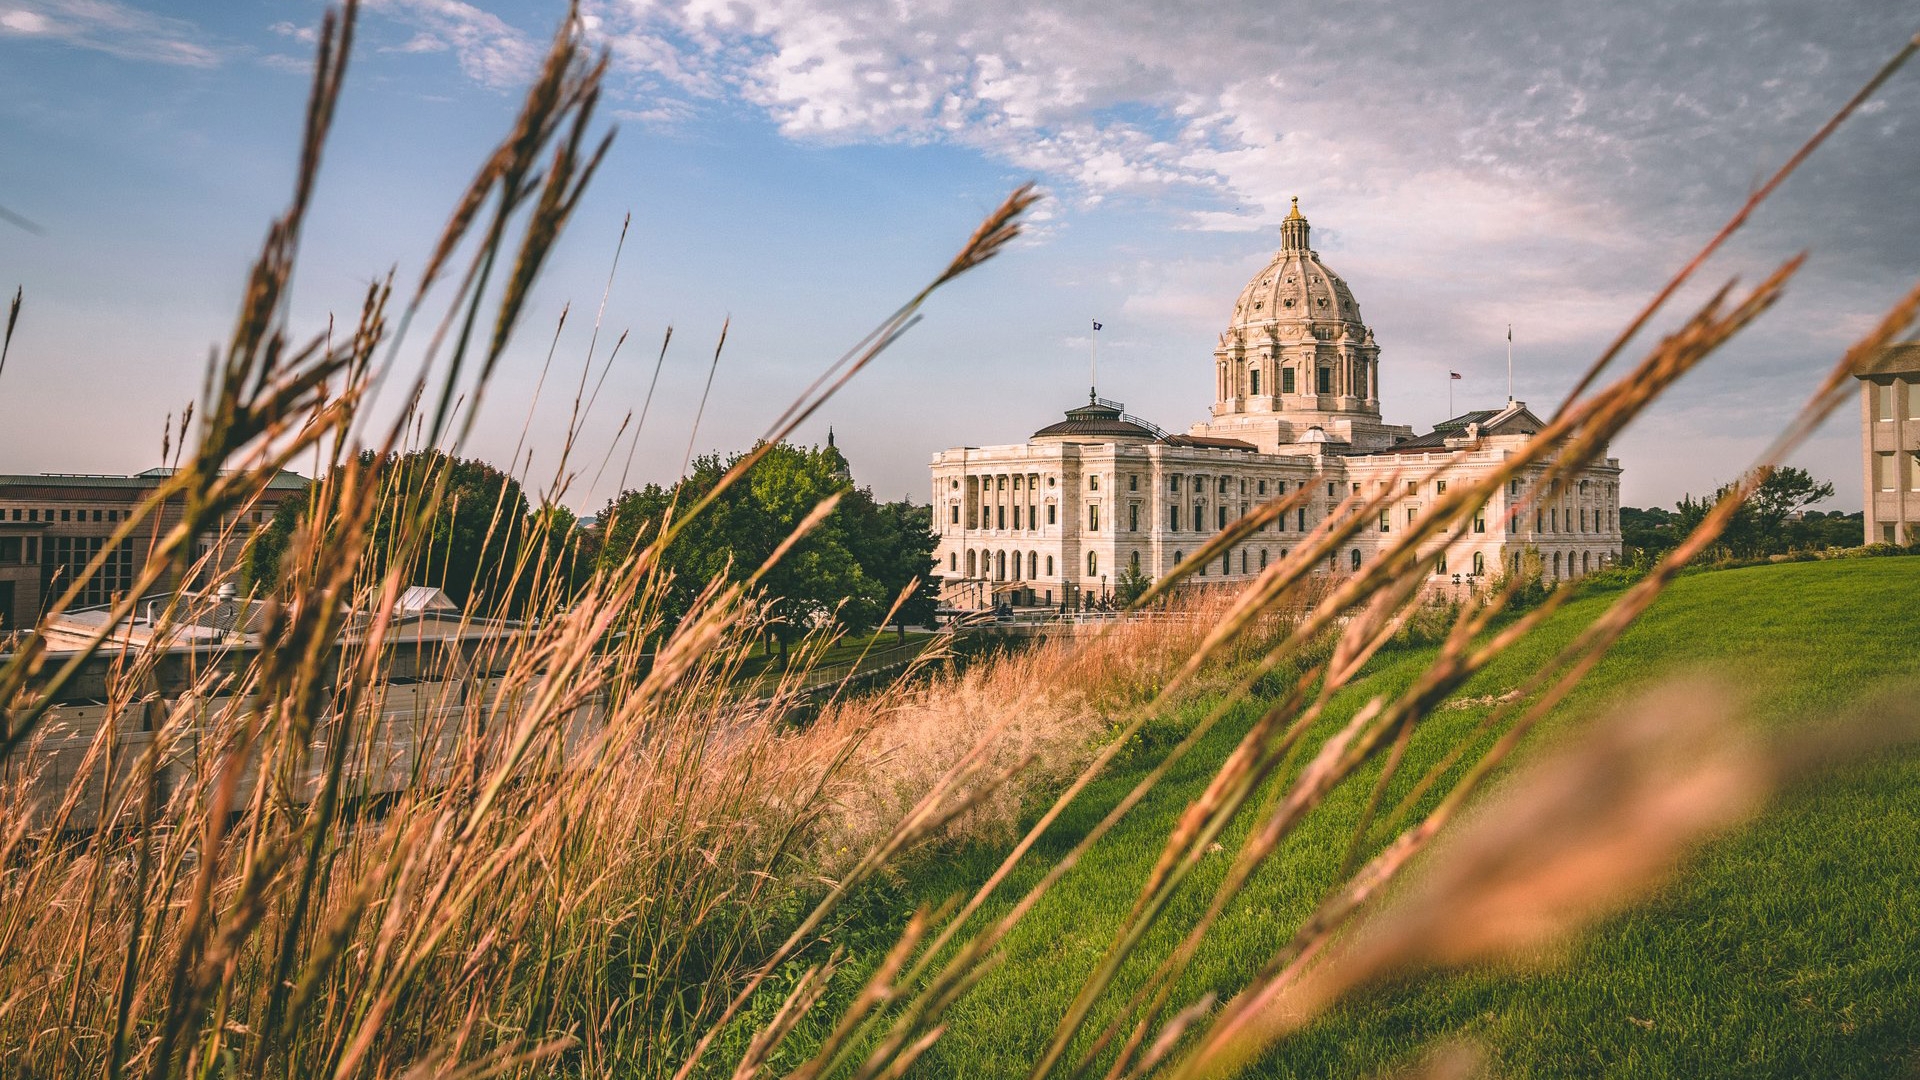 Explore places like the Minnesota State Capitol from the safety and comfort of your home